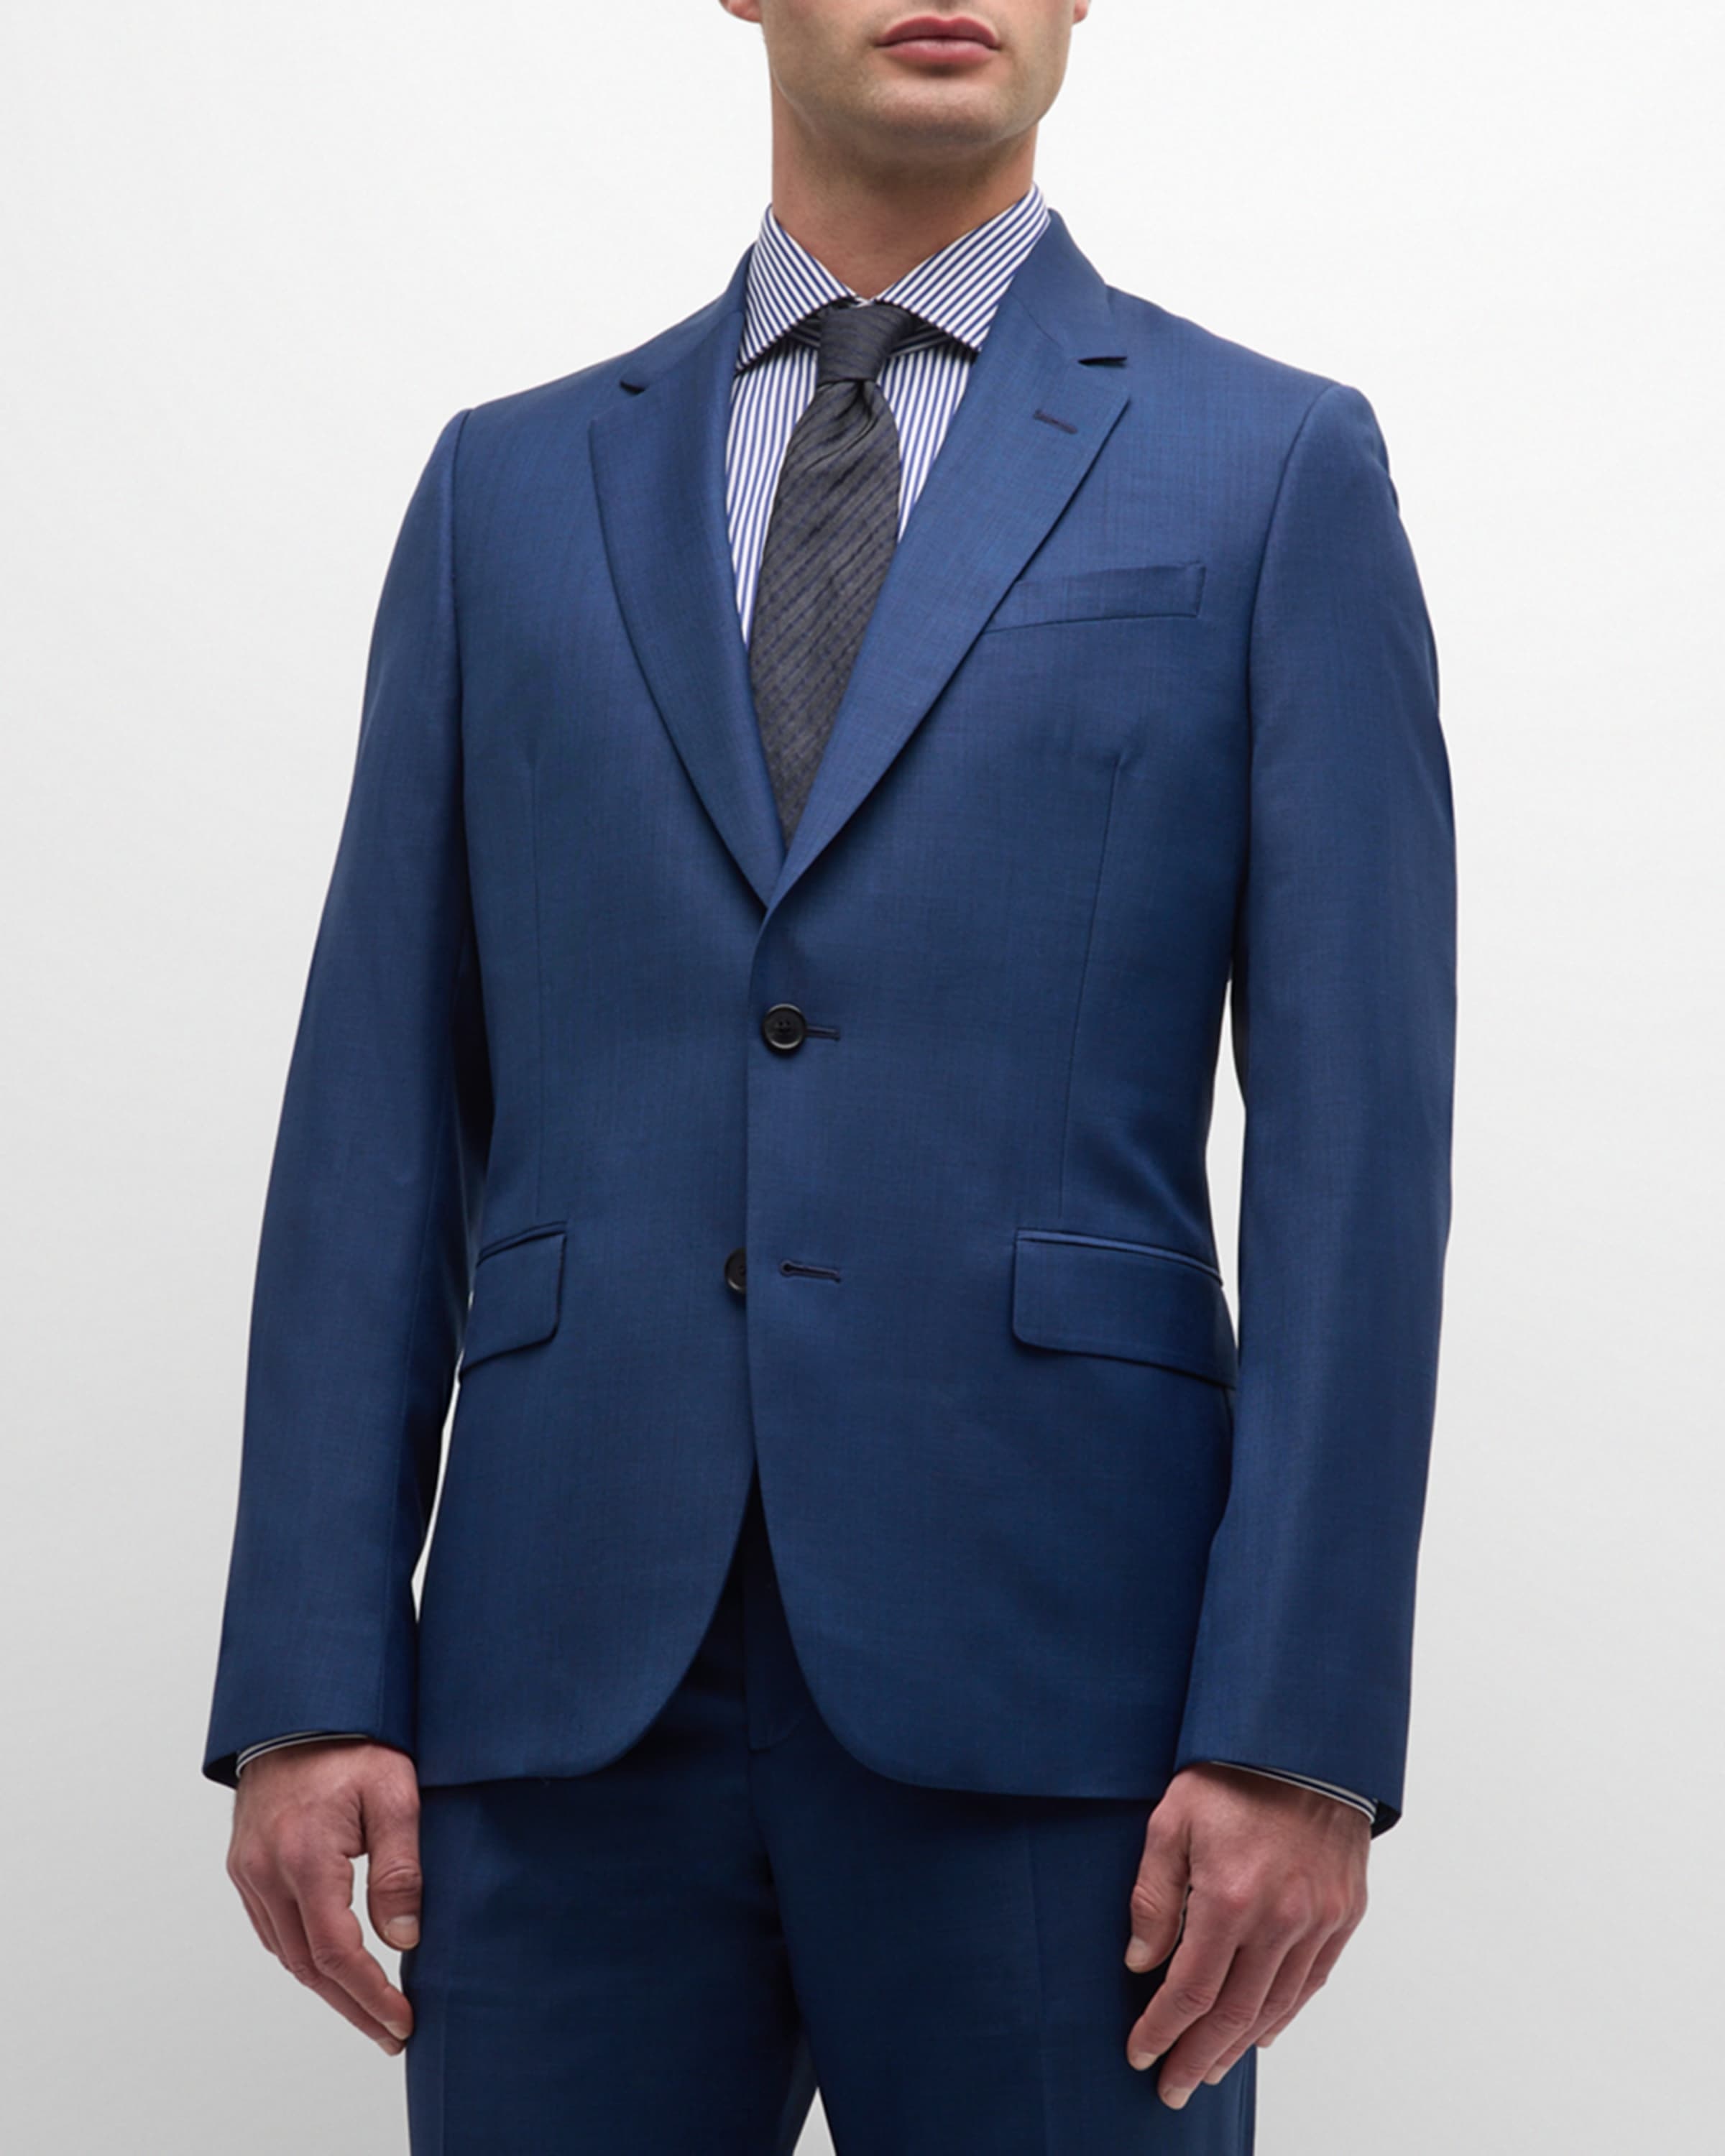 Men's Tailored Fit Wool Two-Button Suit - 1